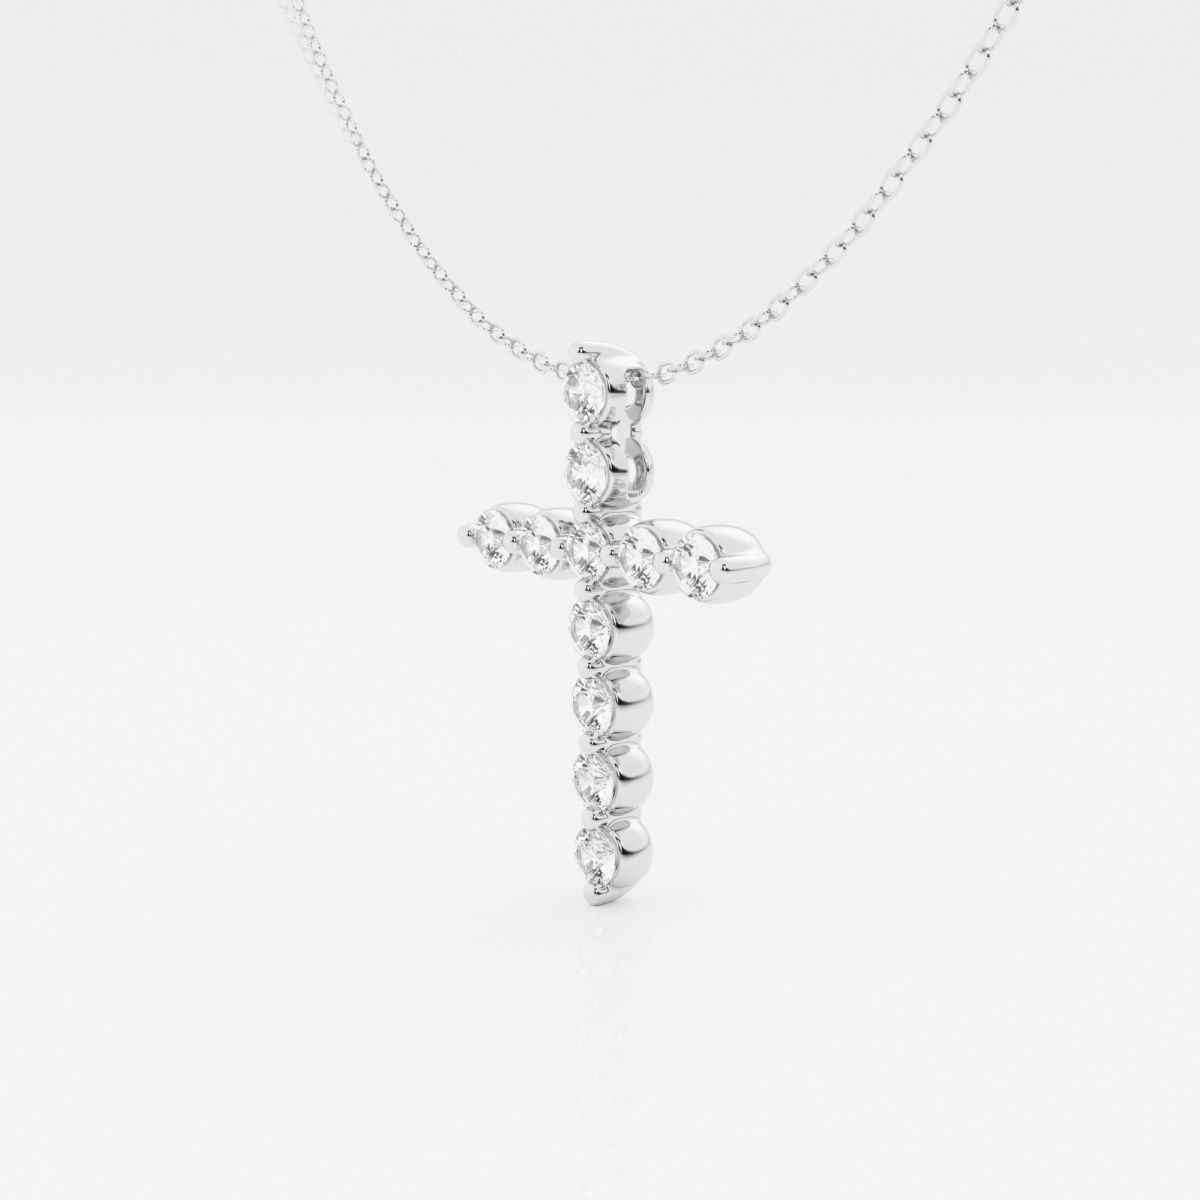 Additional Image 1 for  1 ctw Round Lab Grown Diamond Cross Pendant With Adjustable Chain